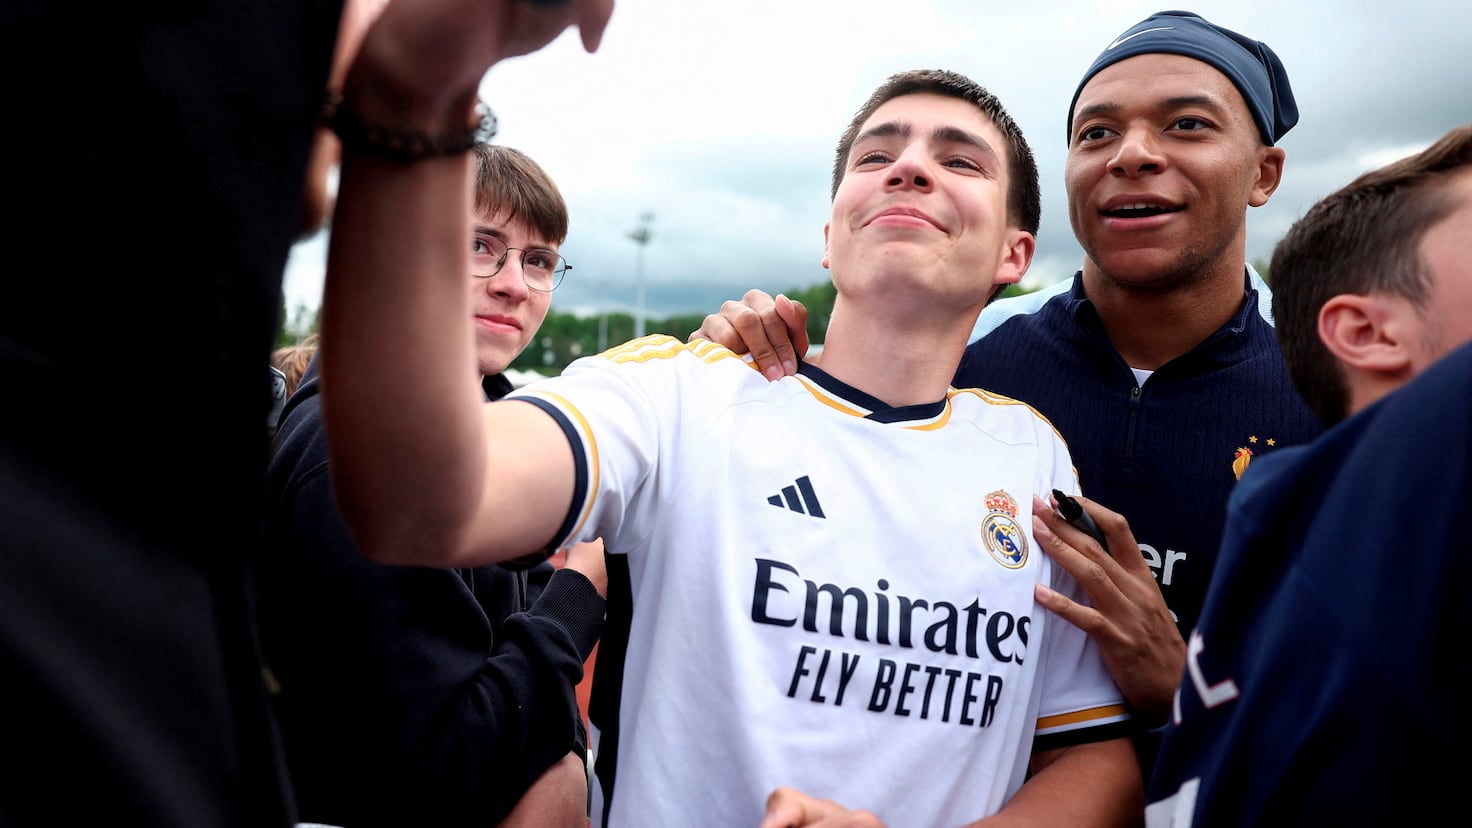 Kylian Mbappé Set to Join Real Madrid: The Transfer of the Decade?